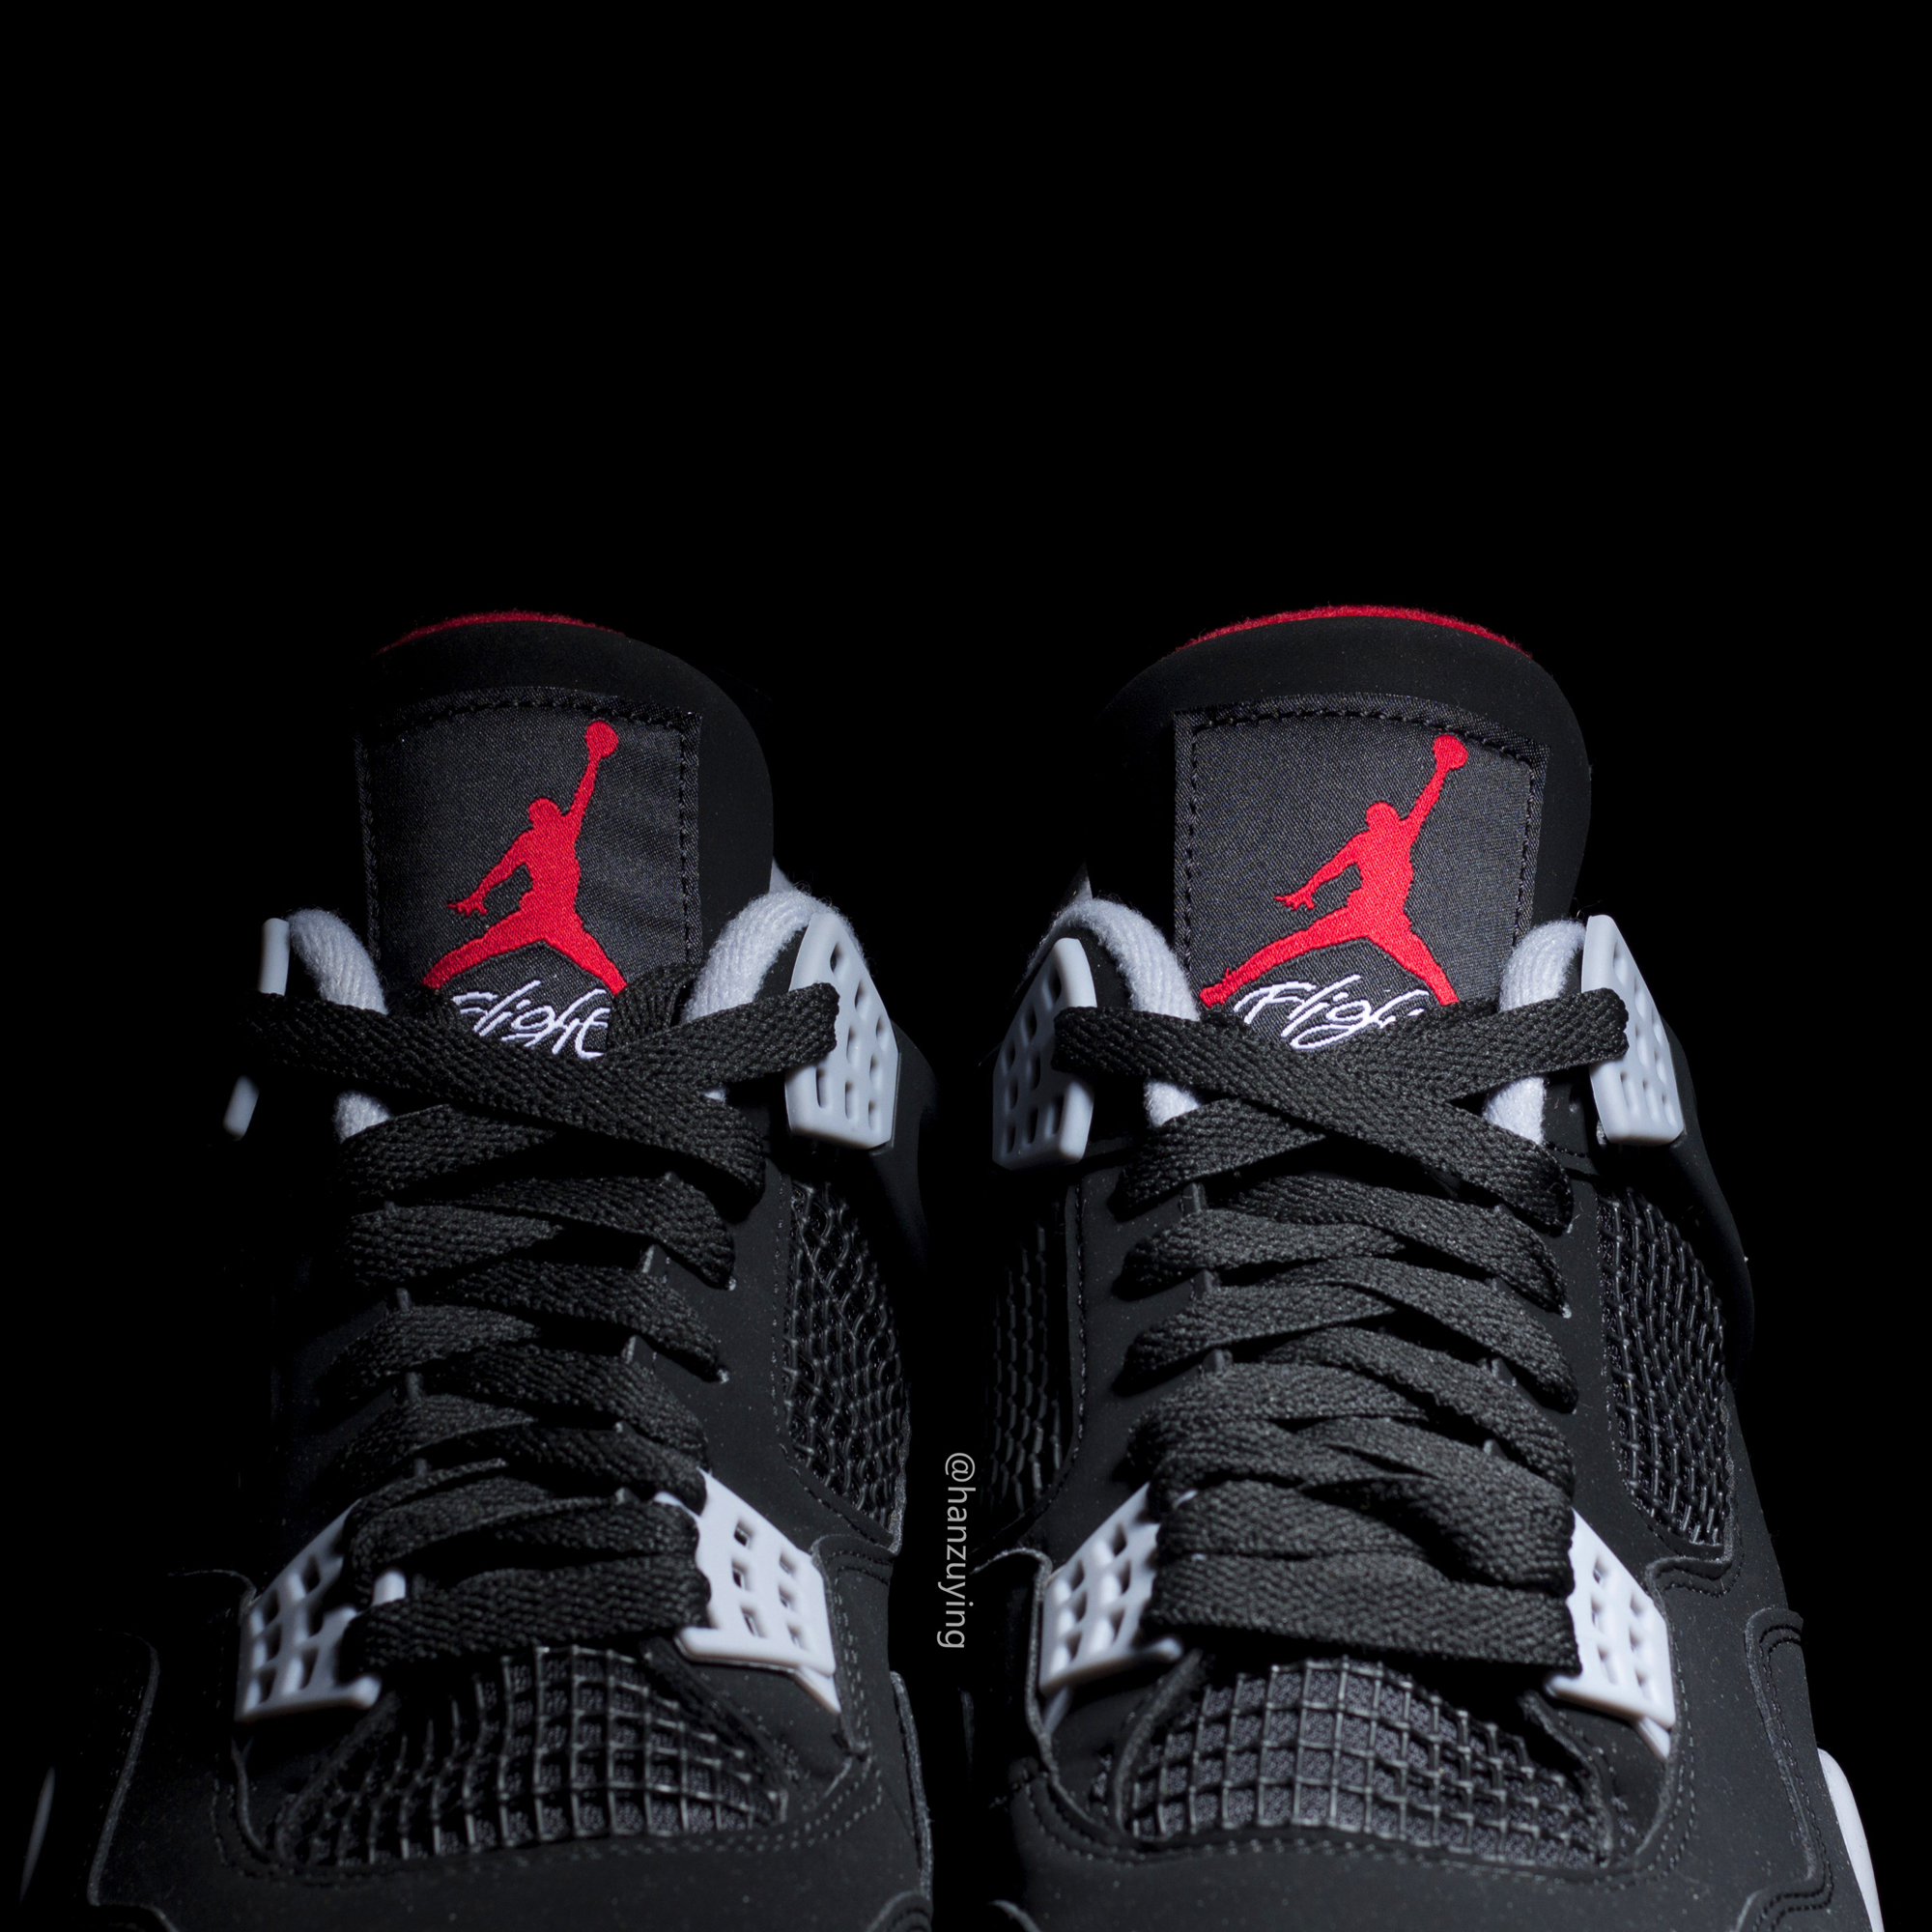 A Detailed Look at the Air Jordan 4 Retro OG Black/Cement for 2019 ...